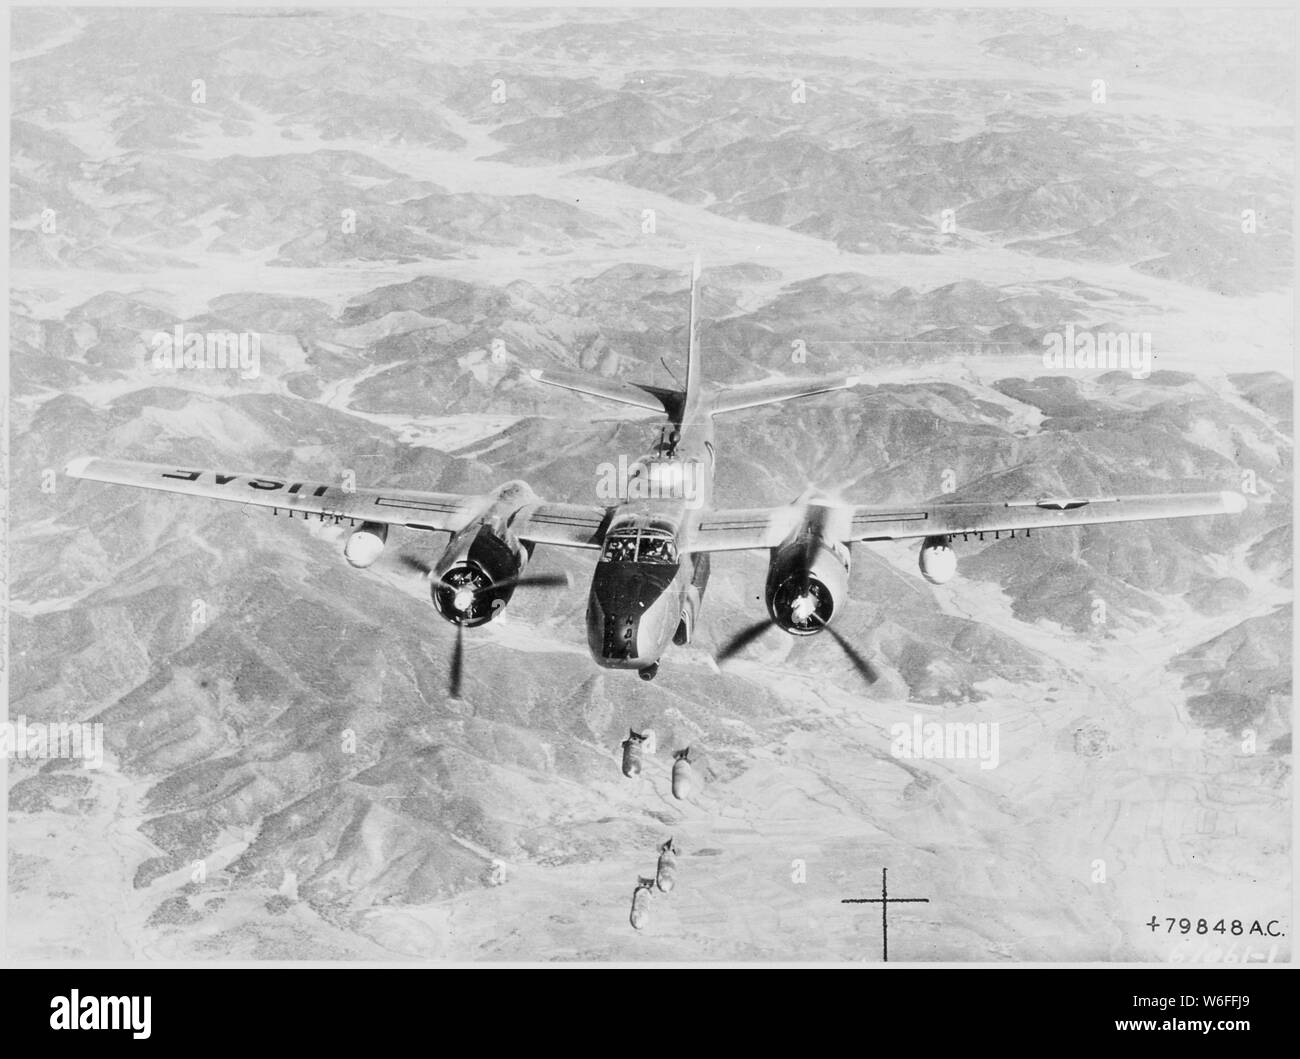 Bombs Away-This Fifth Air Force B-26 Invader of the 452nd Bombardment Wing drops its load of general purpose bombs on a vital Communist target in North Korea. Continued interdiction bombing of enemy supply centers, troop concentrations and communication lines is depriving the Communist troops of sorely needed war supplies. Stock Photo